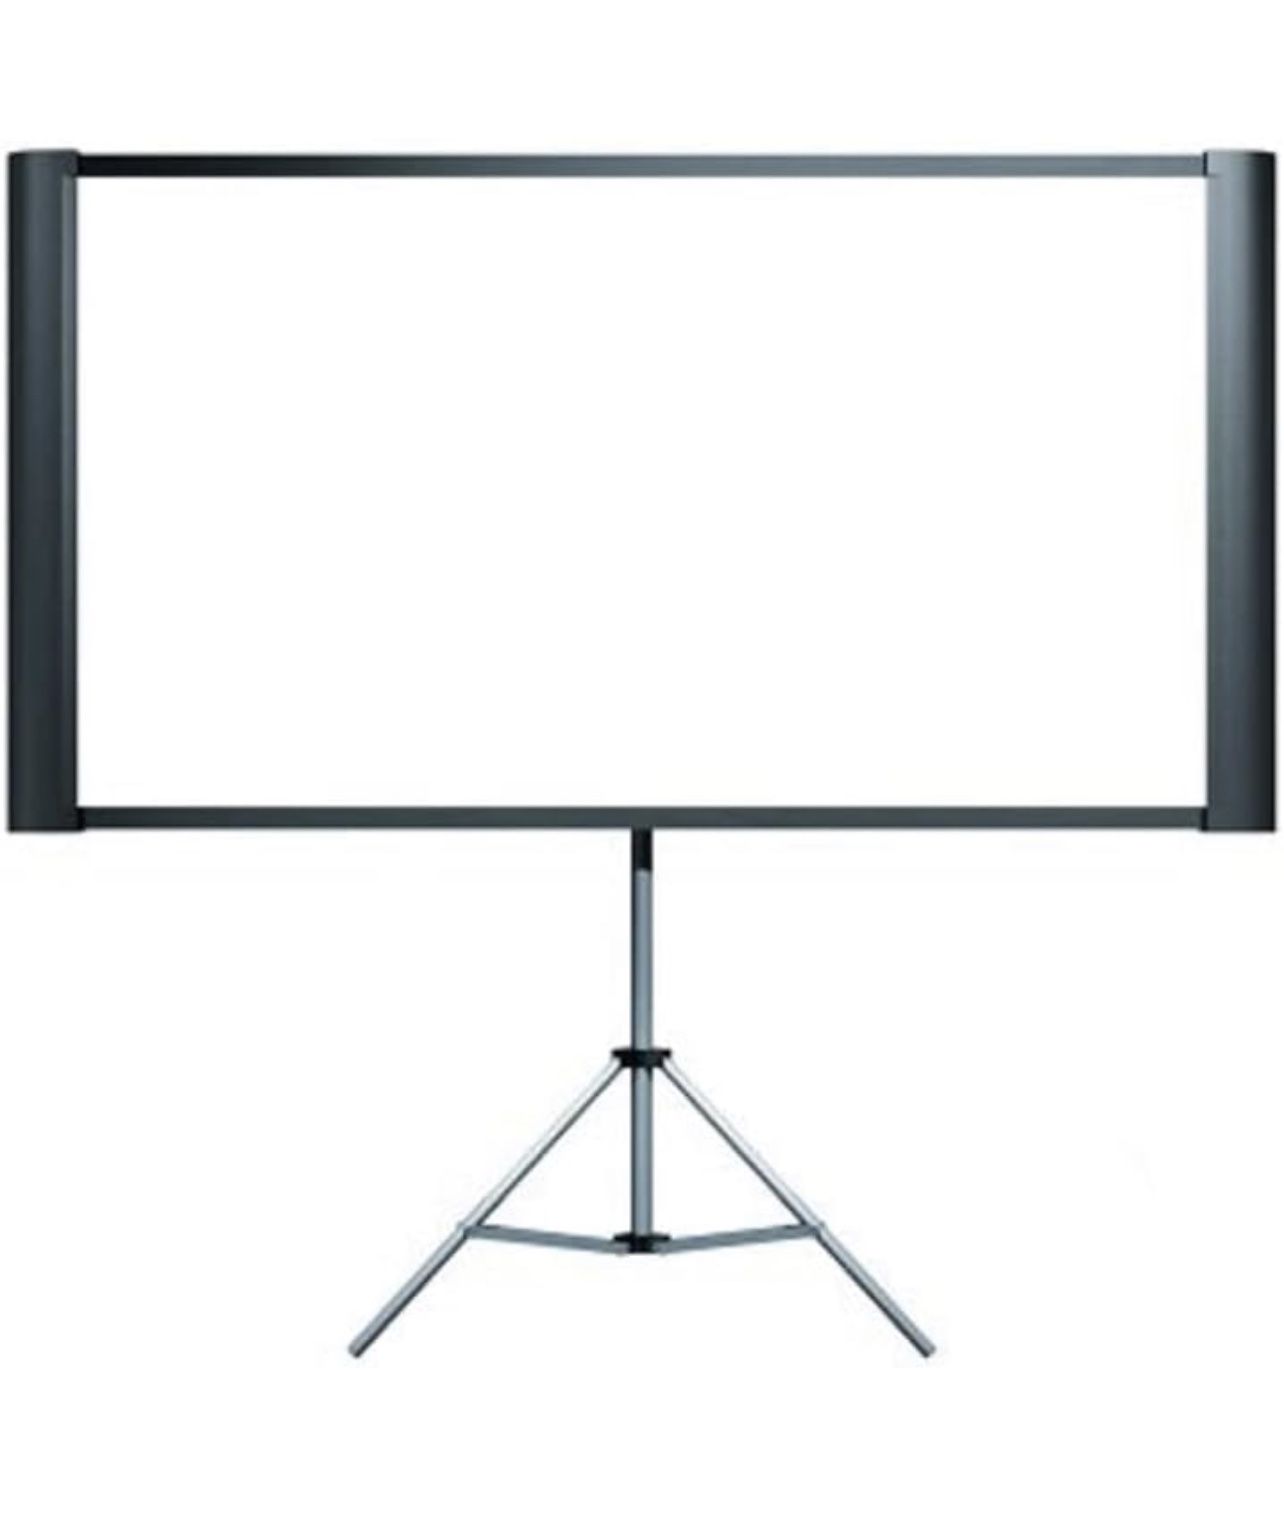 Projection Screen 